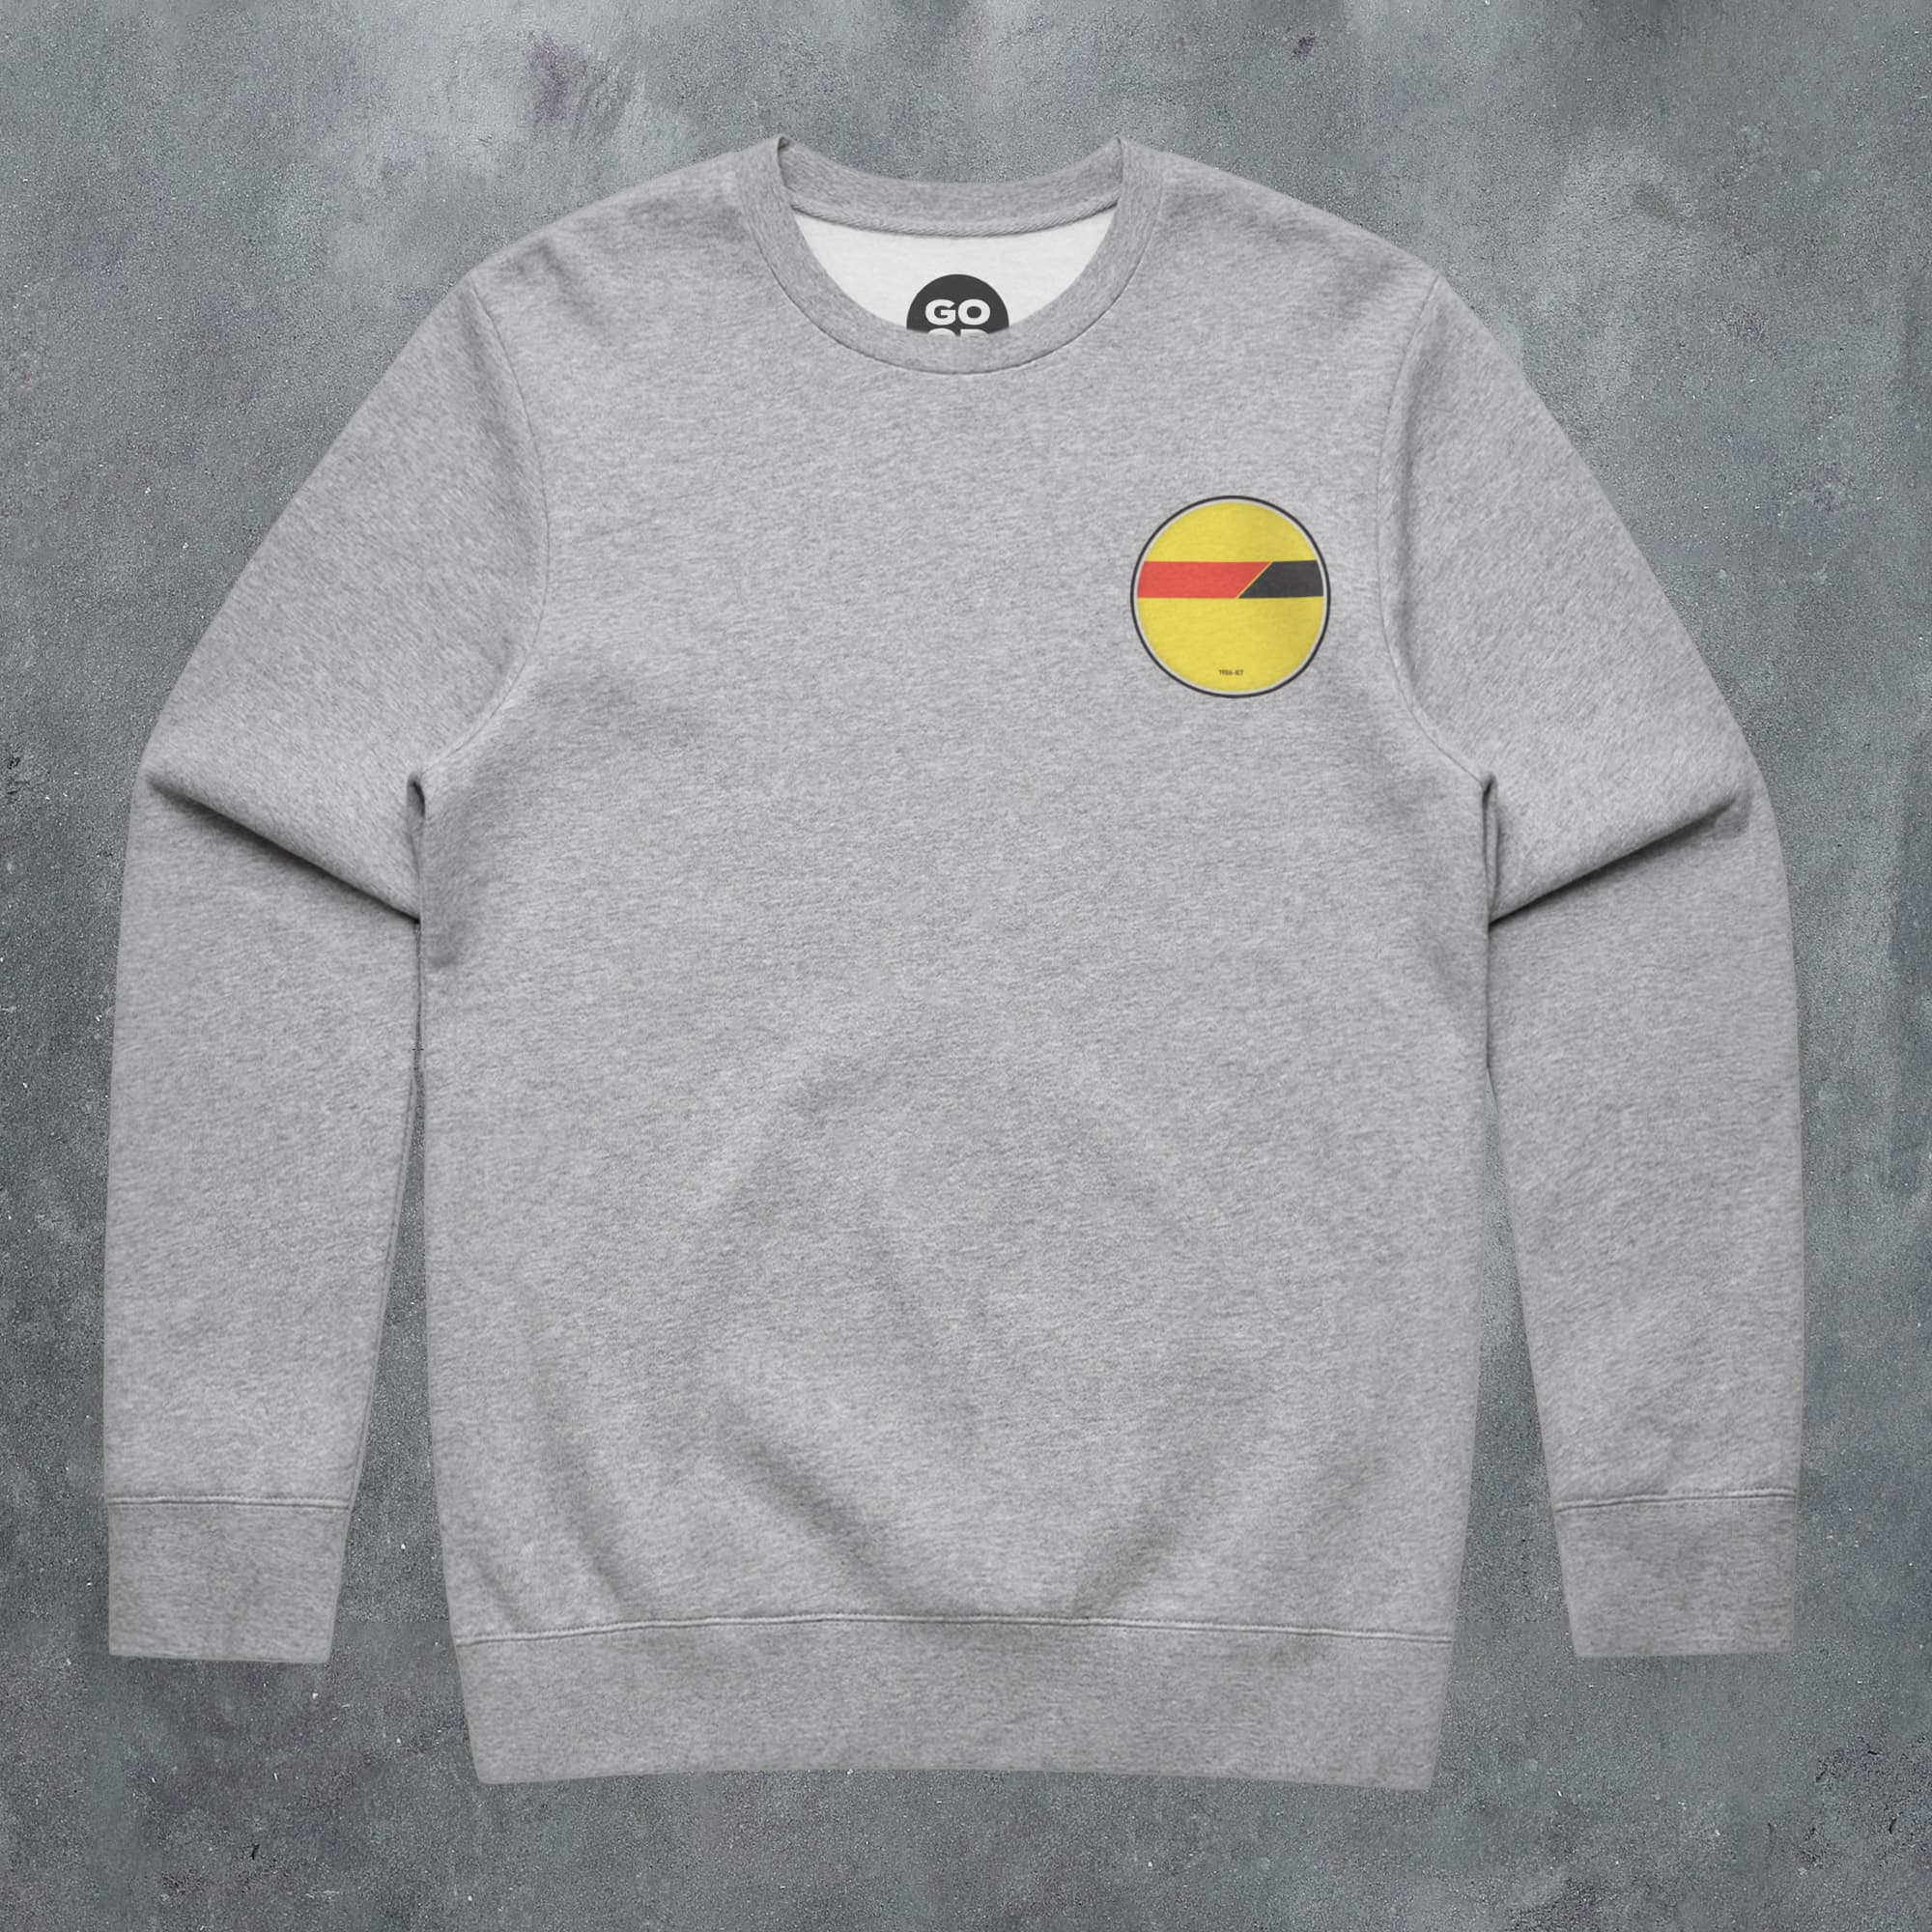 a grey sweatshirt with a yellow and red smiley face on it